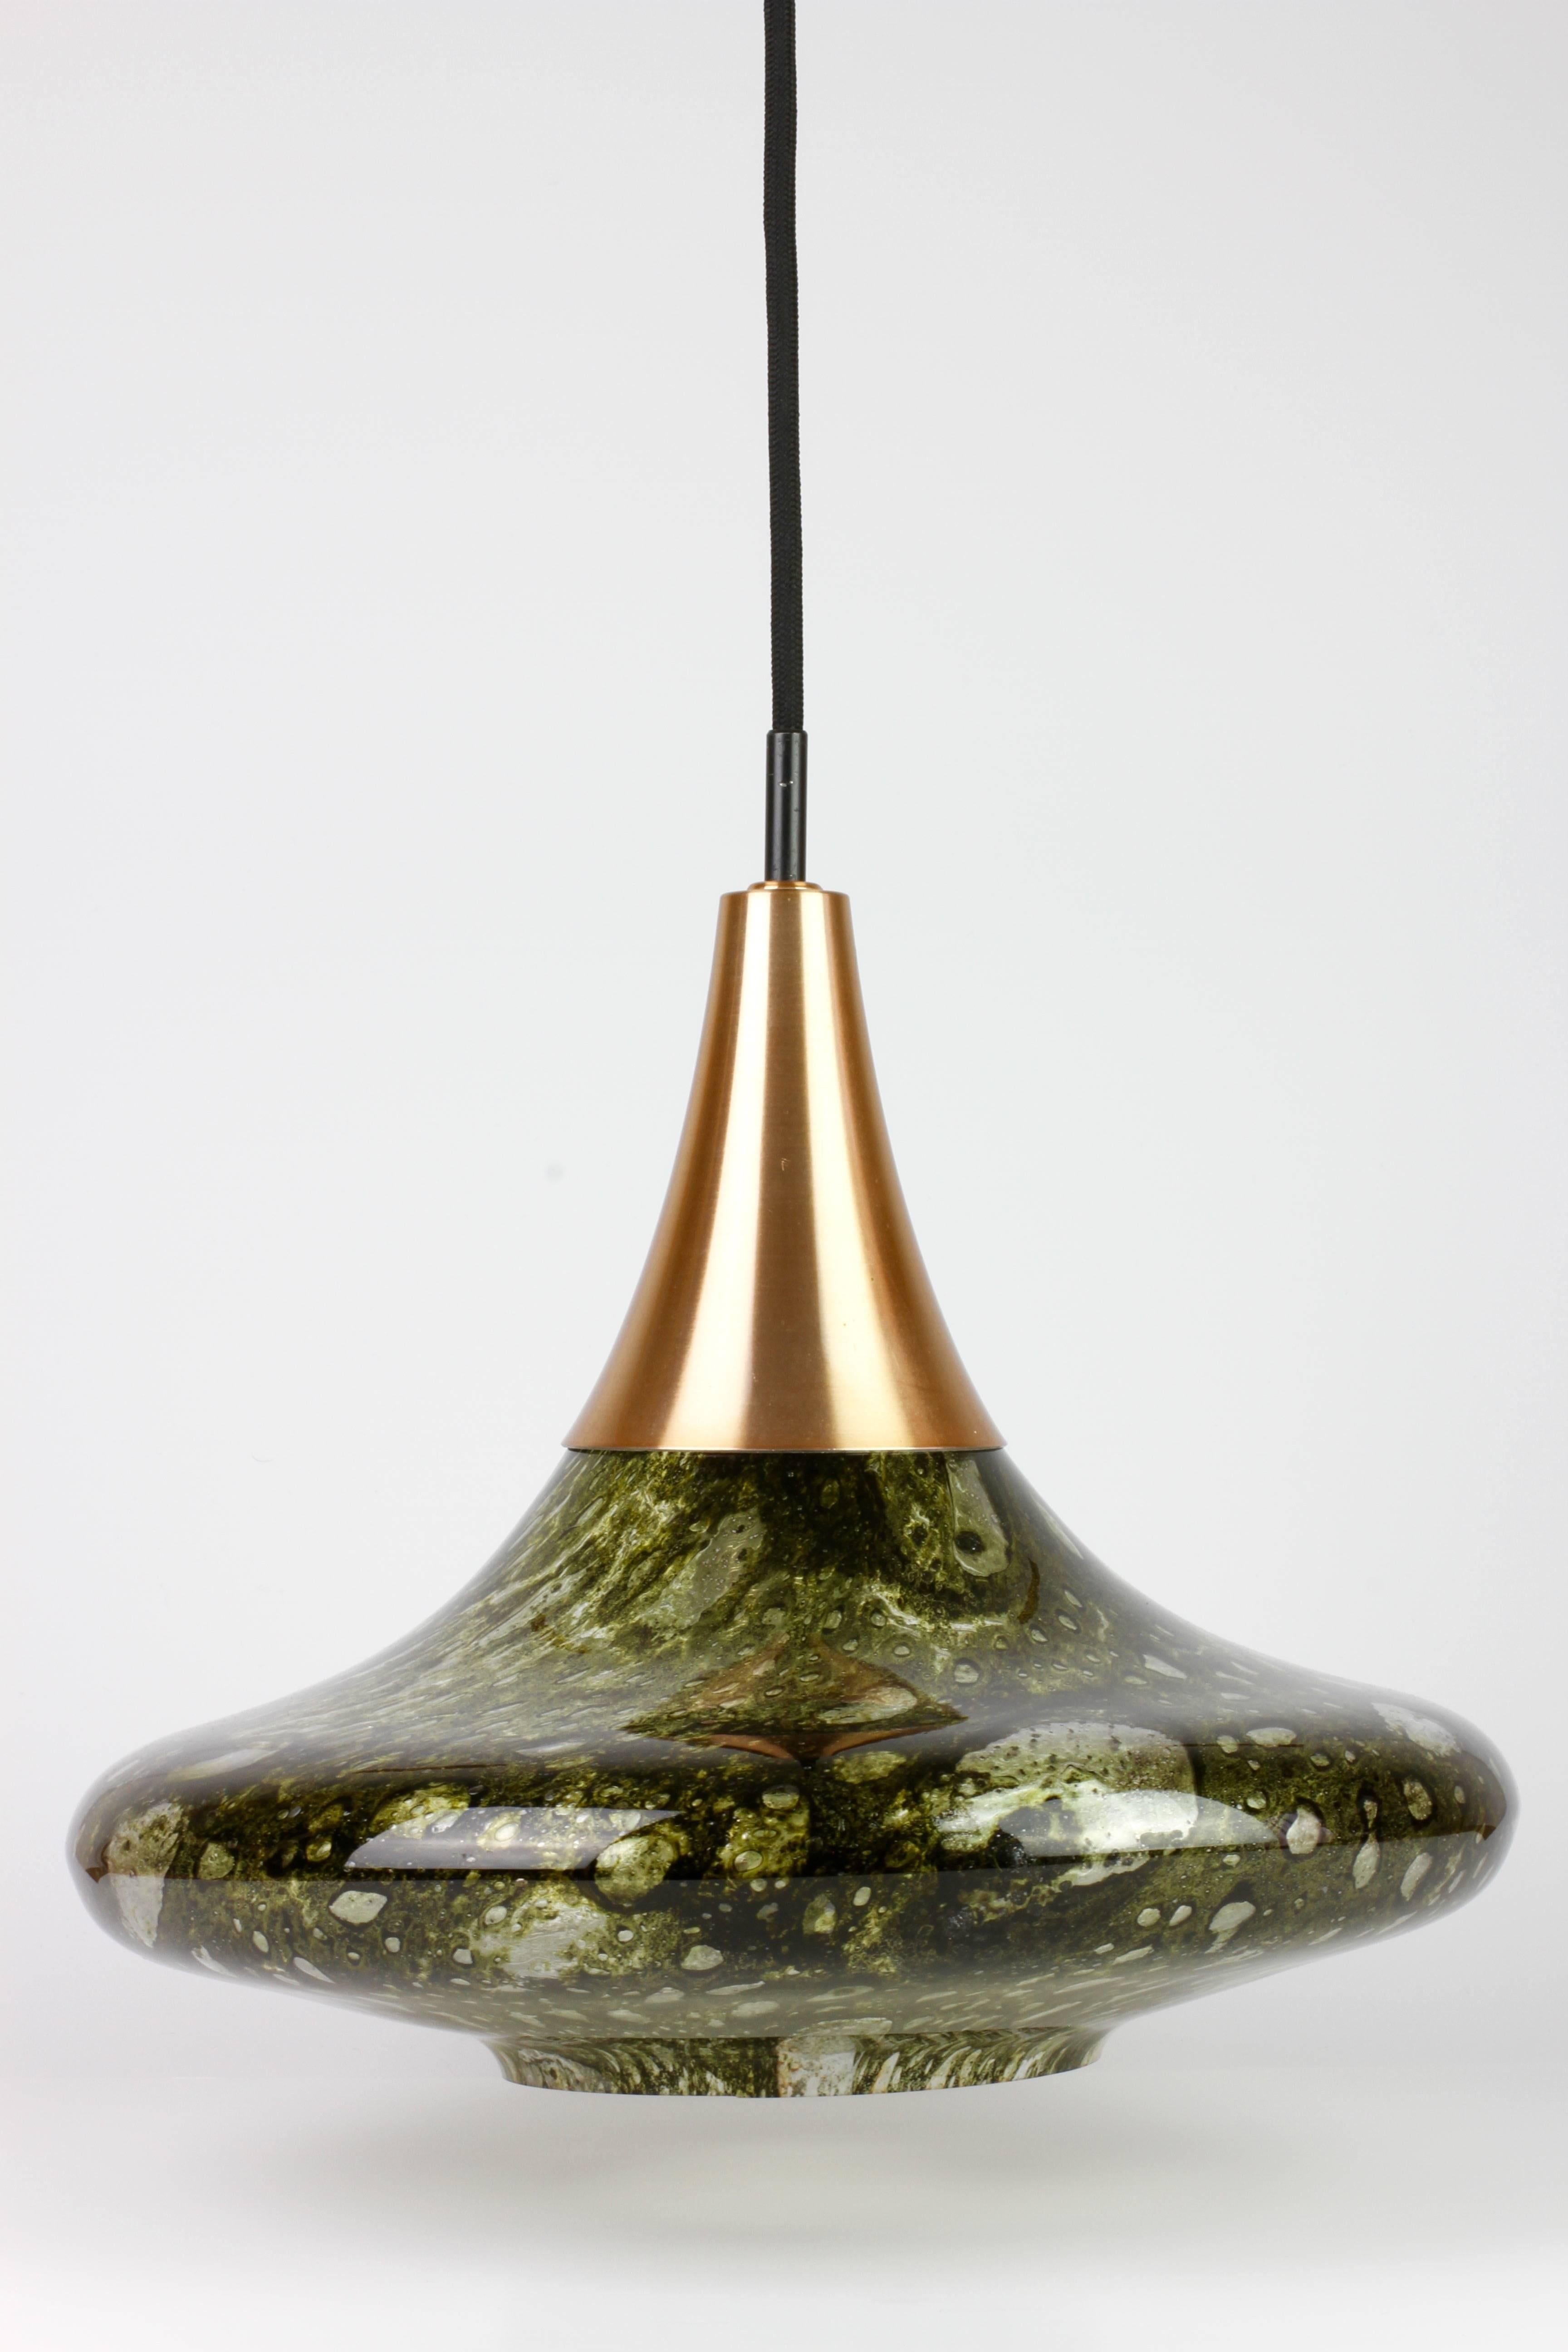 A beautiful Mid-Century Bubble glass pendant light by Doria Leuchten, Germany. Made in the later half of the 1960s to early 1970s, this gorgeous pendant features wonderfully made, mouth blown Murano glass in a very interesting form reminiscent of a